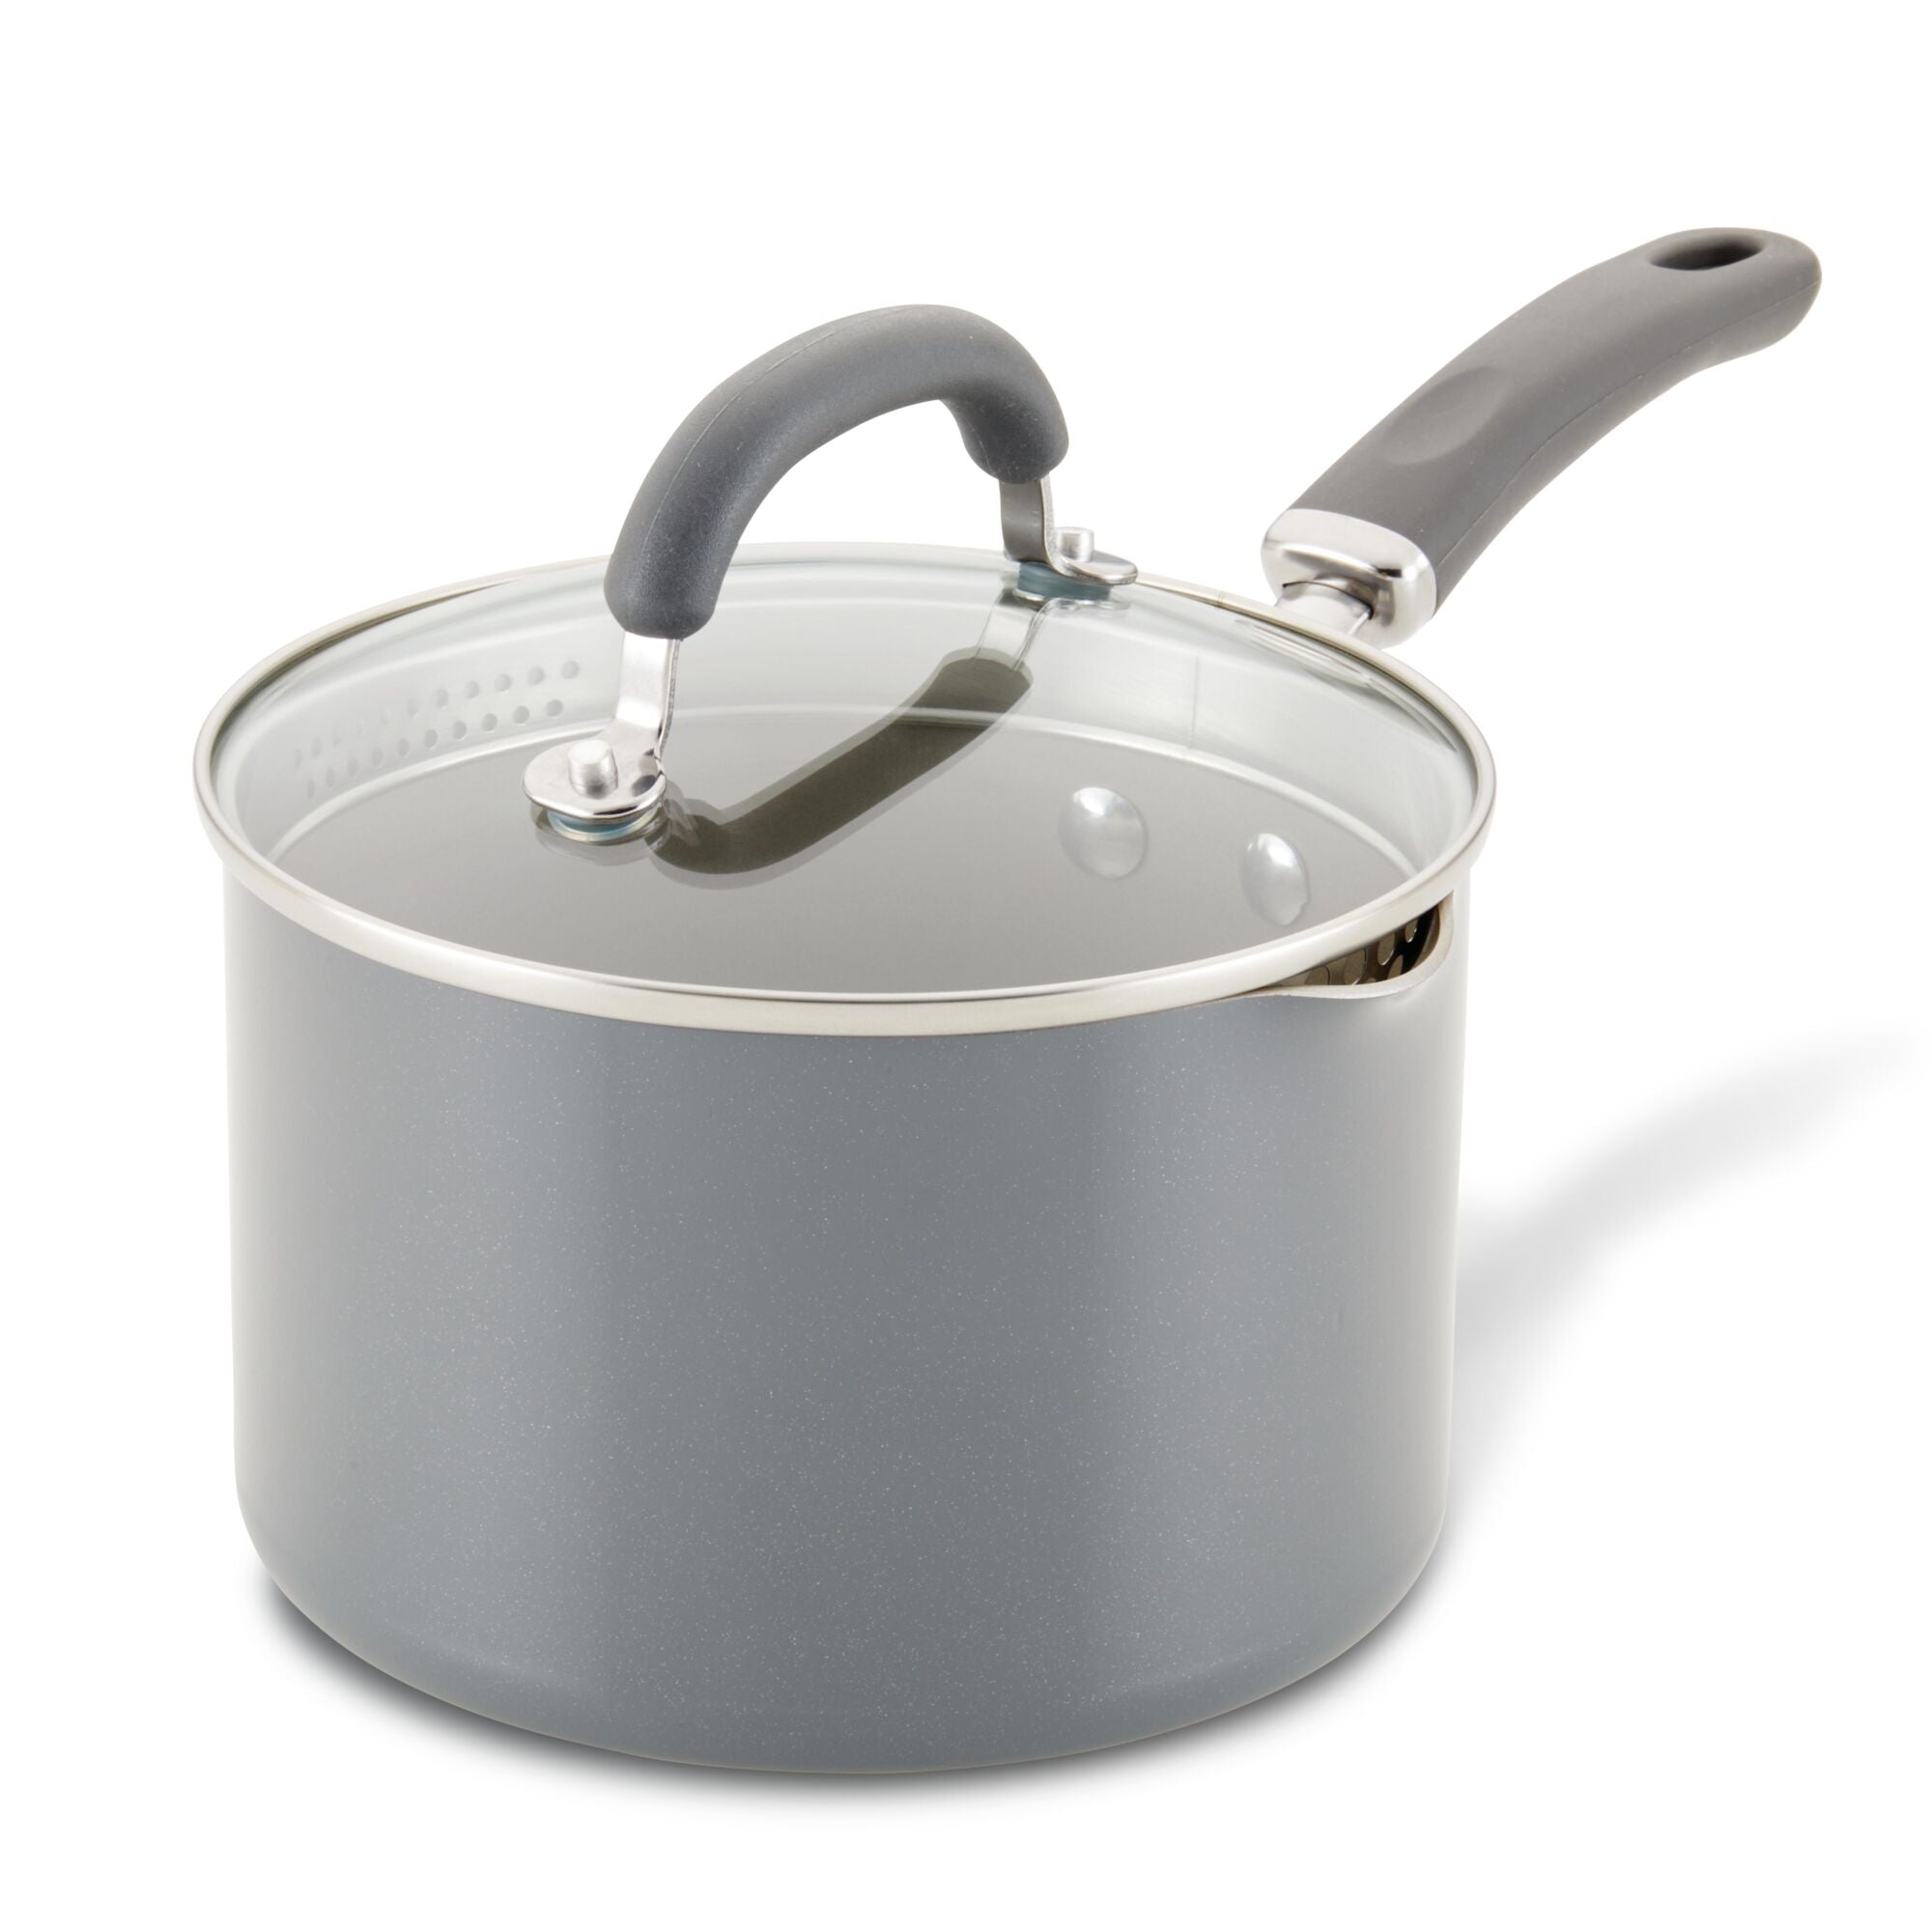 Mainstays Stainless Steel 3-Quart Saucepan with Straining Lid - FREE  SHIPPING